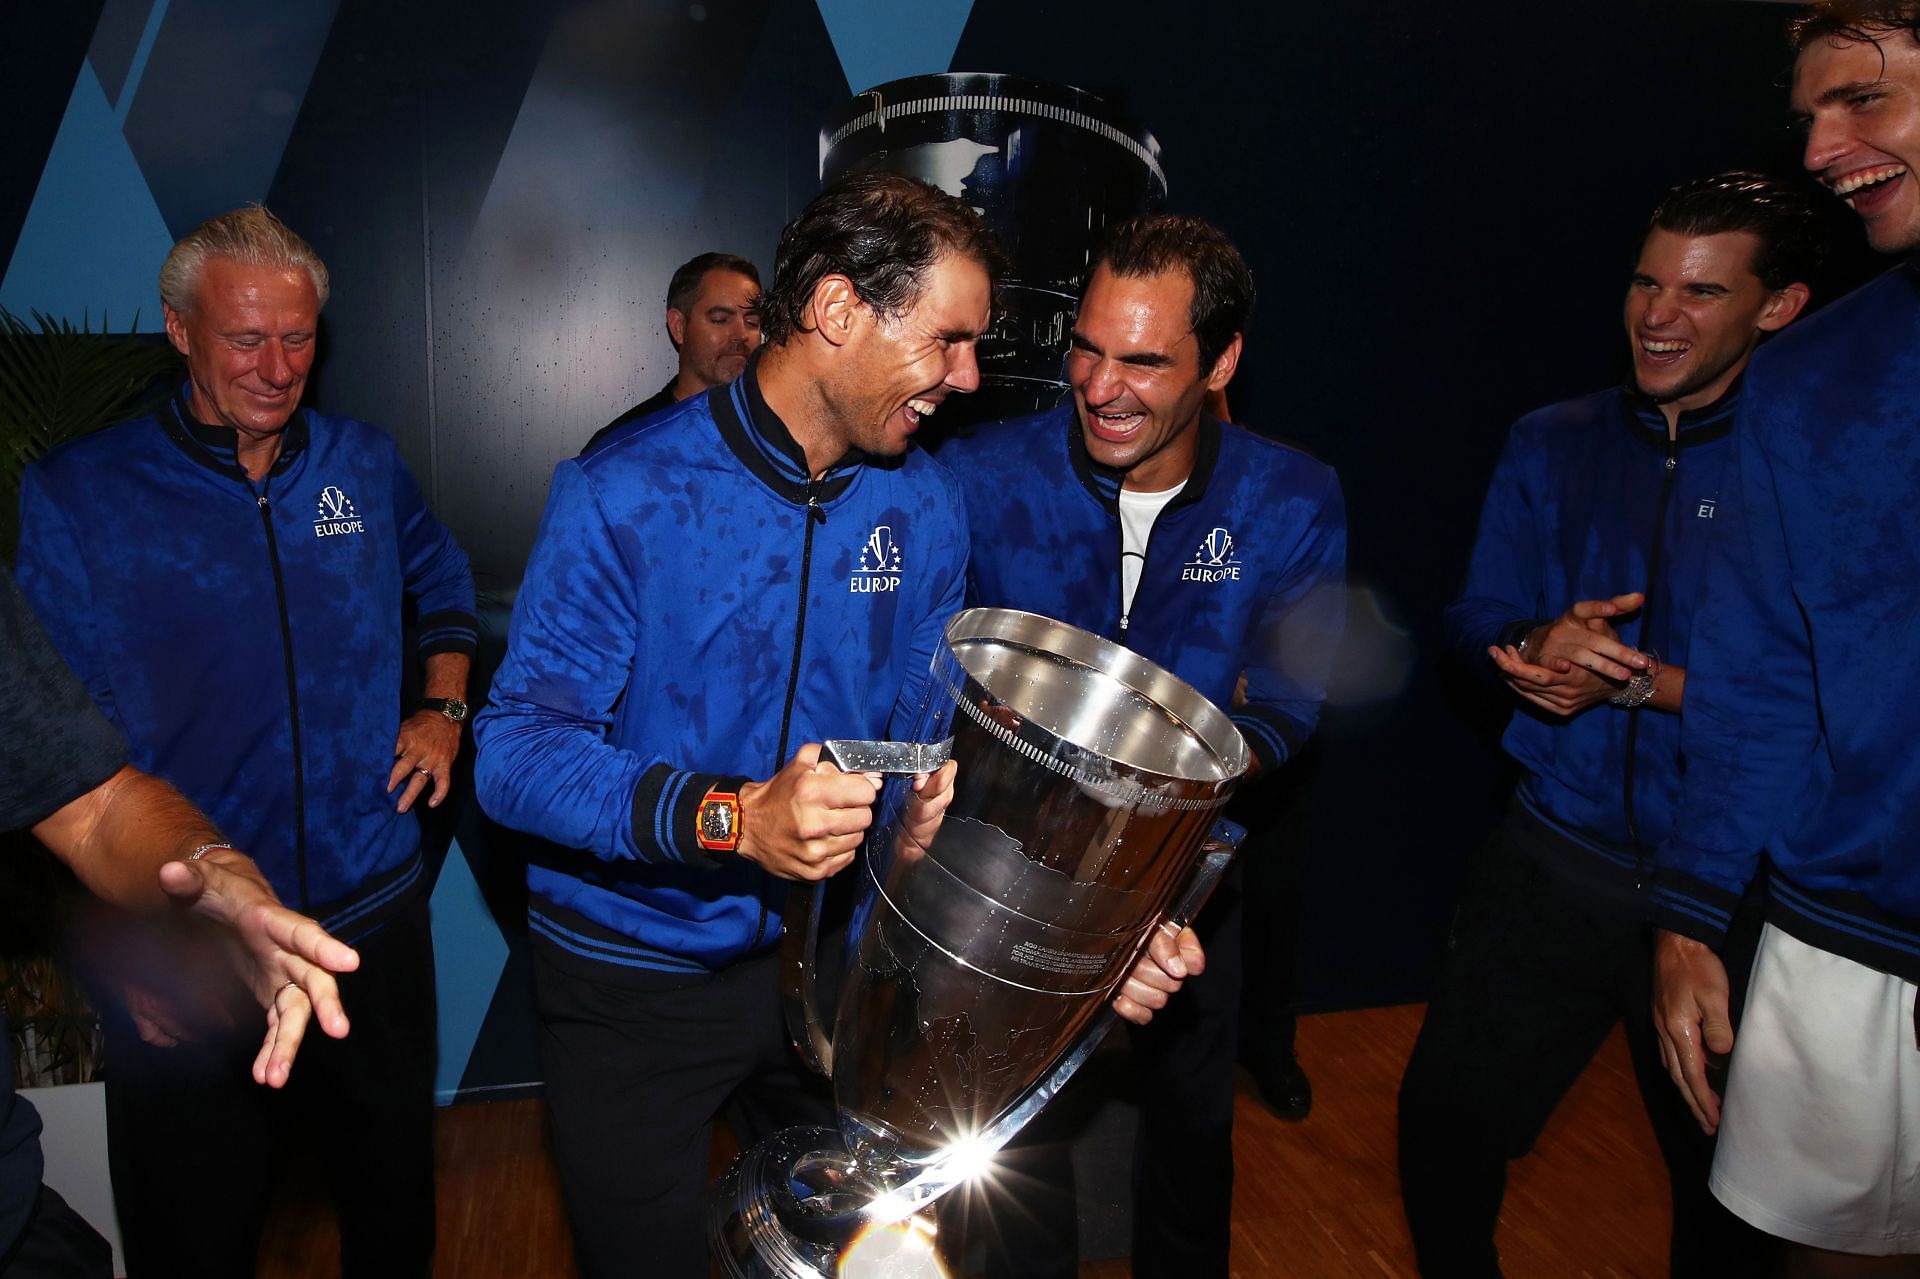 Rafael Nadal and Roger Federer at the 2019 Laver Cup